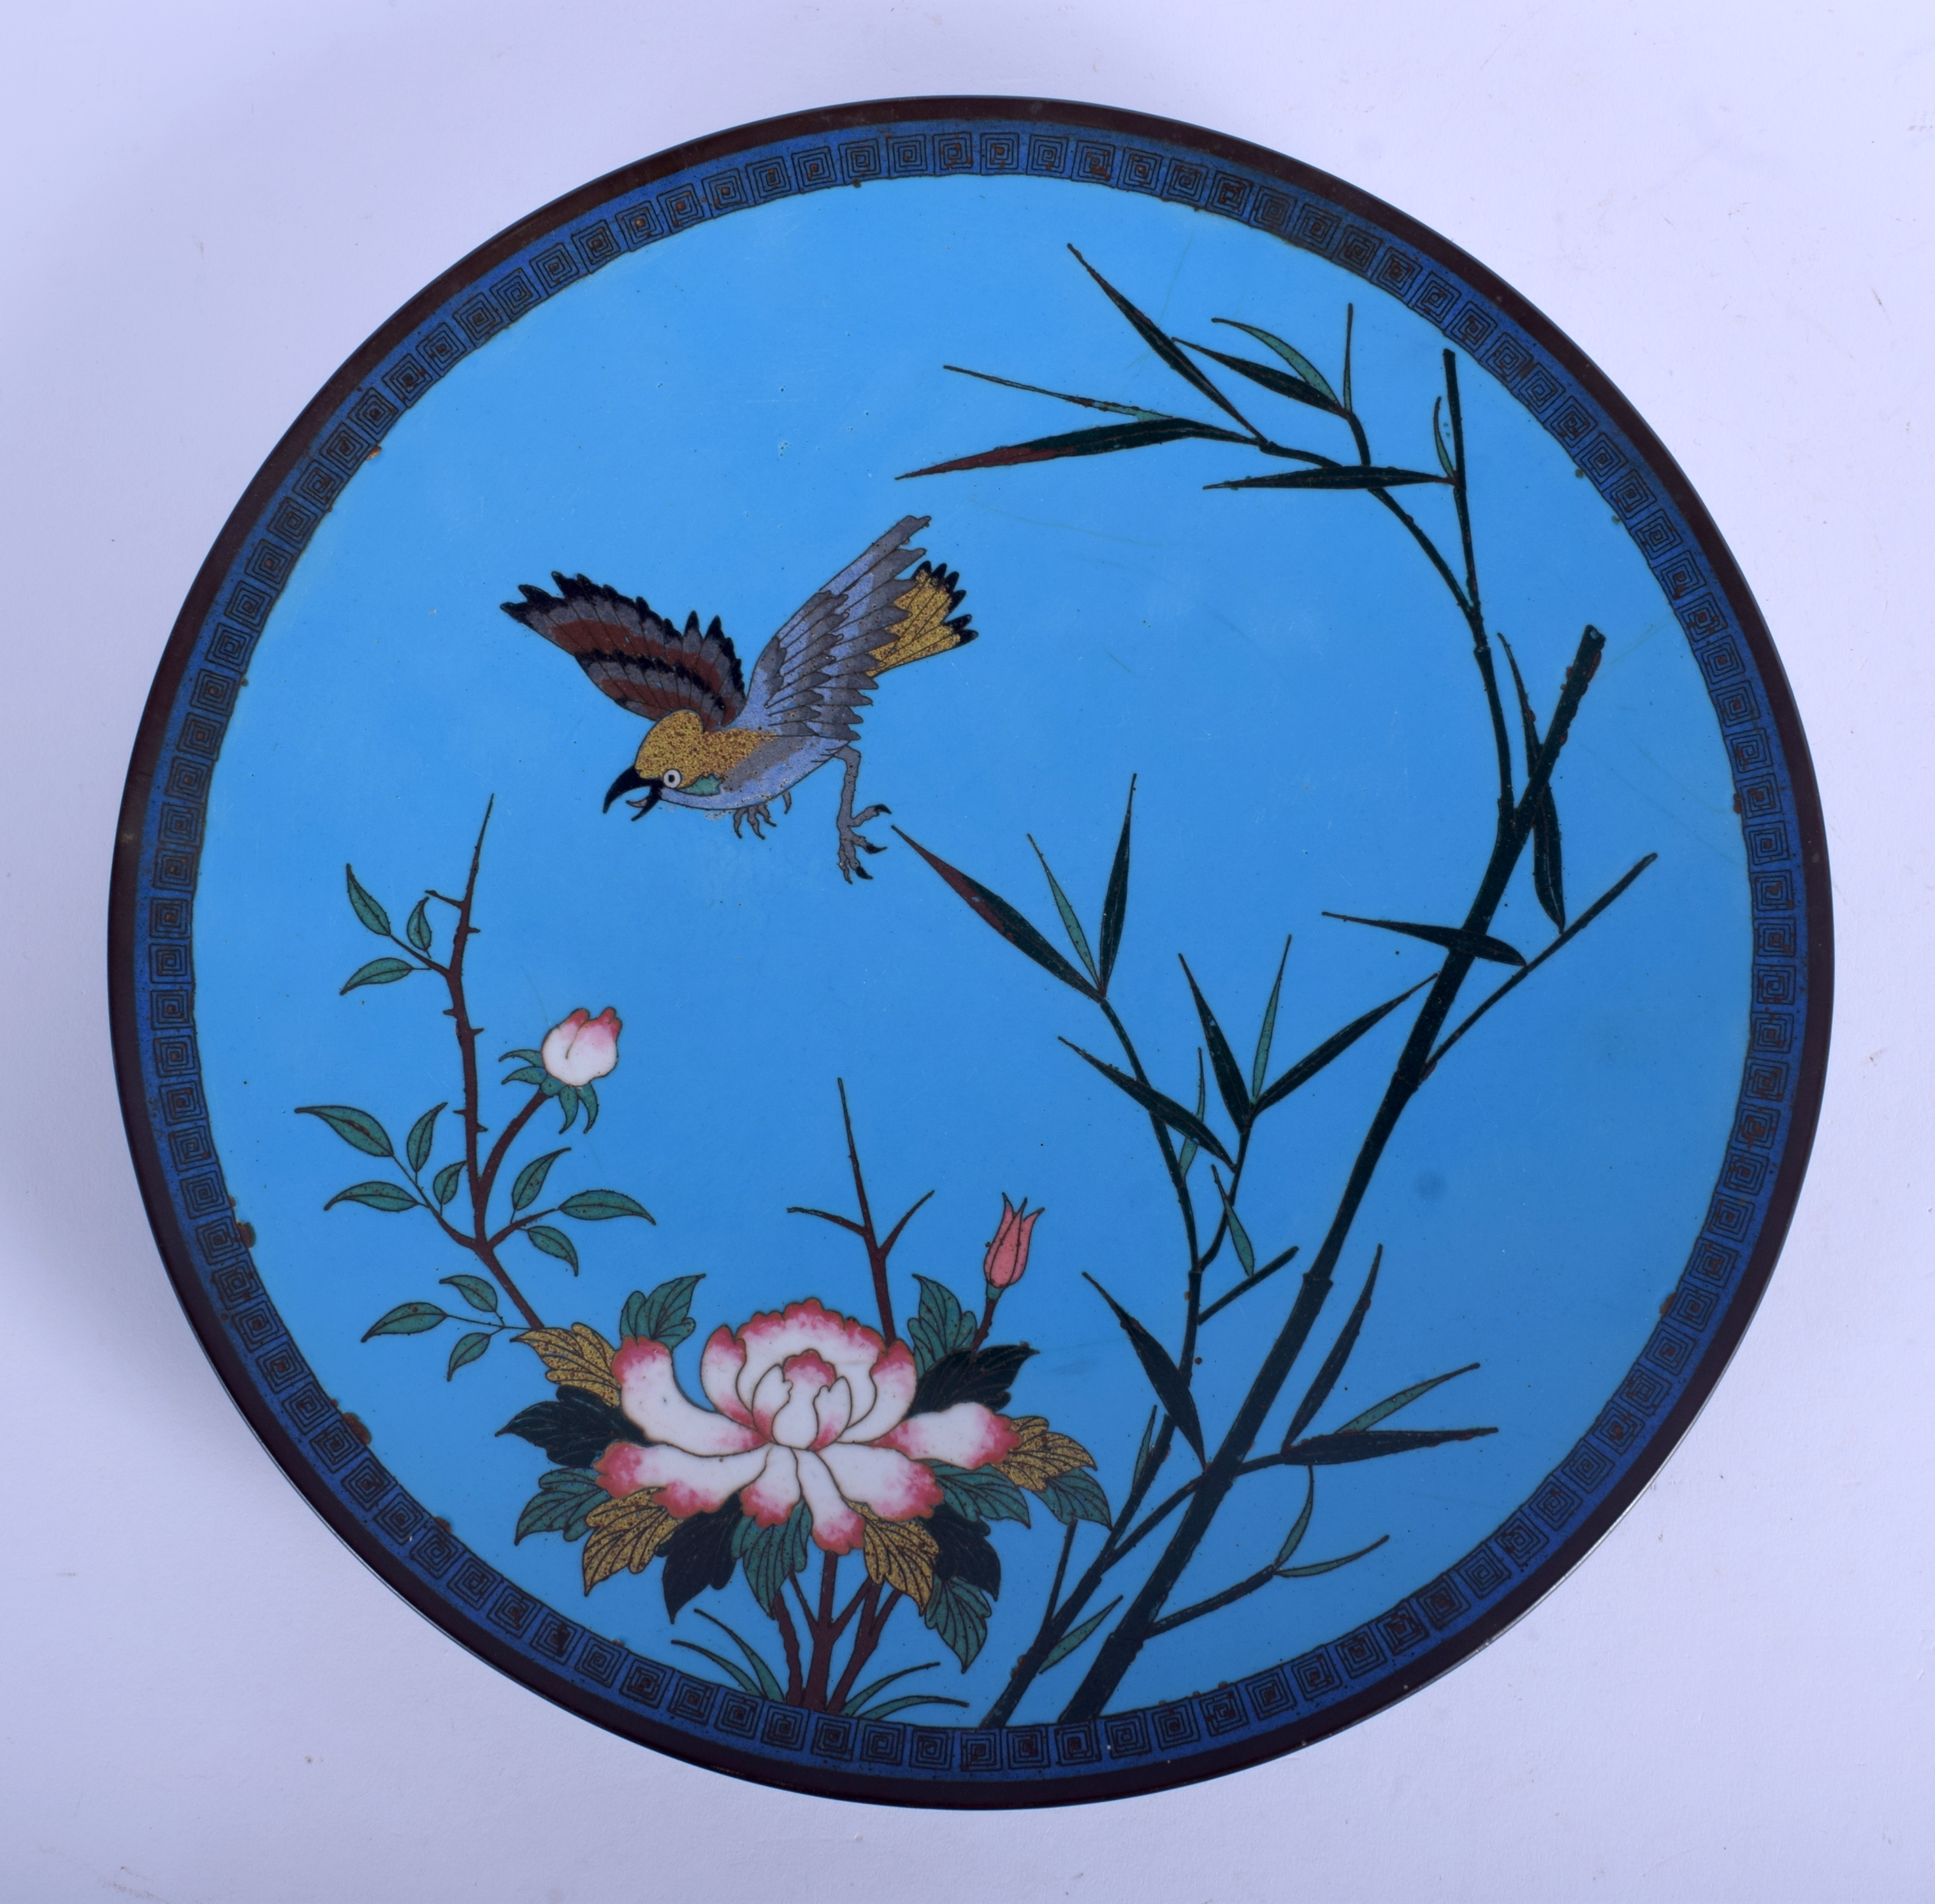 A 19TH CENTURY JAPANESE MEIJI PERIOD CLOISONNE ENAMEL DISH decorated with a bird in flight. 30 cm di